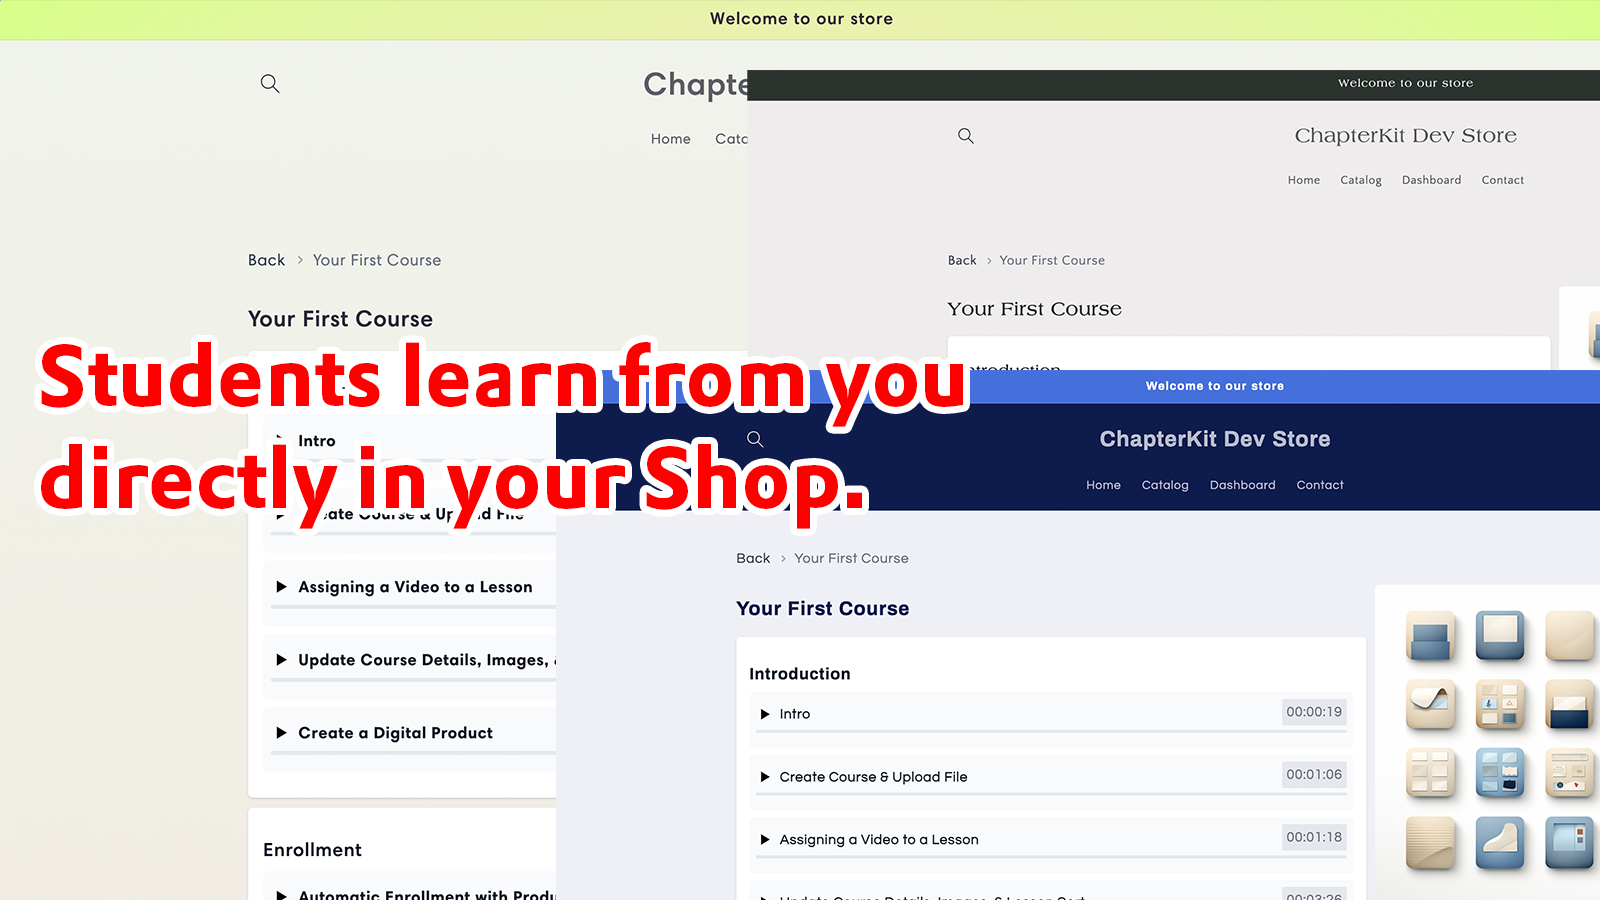 Students learn directly in your shop Screenshot